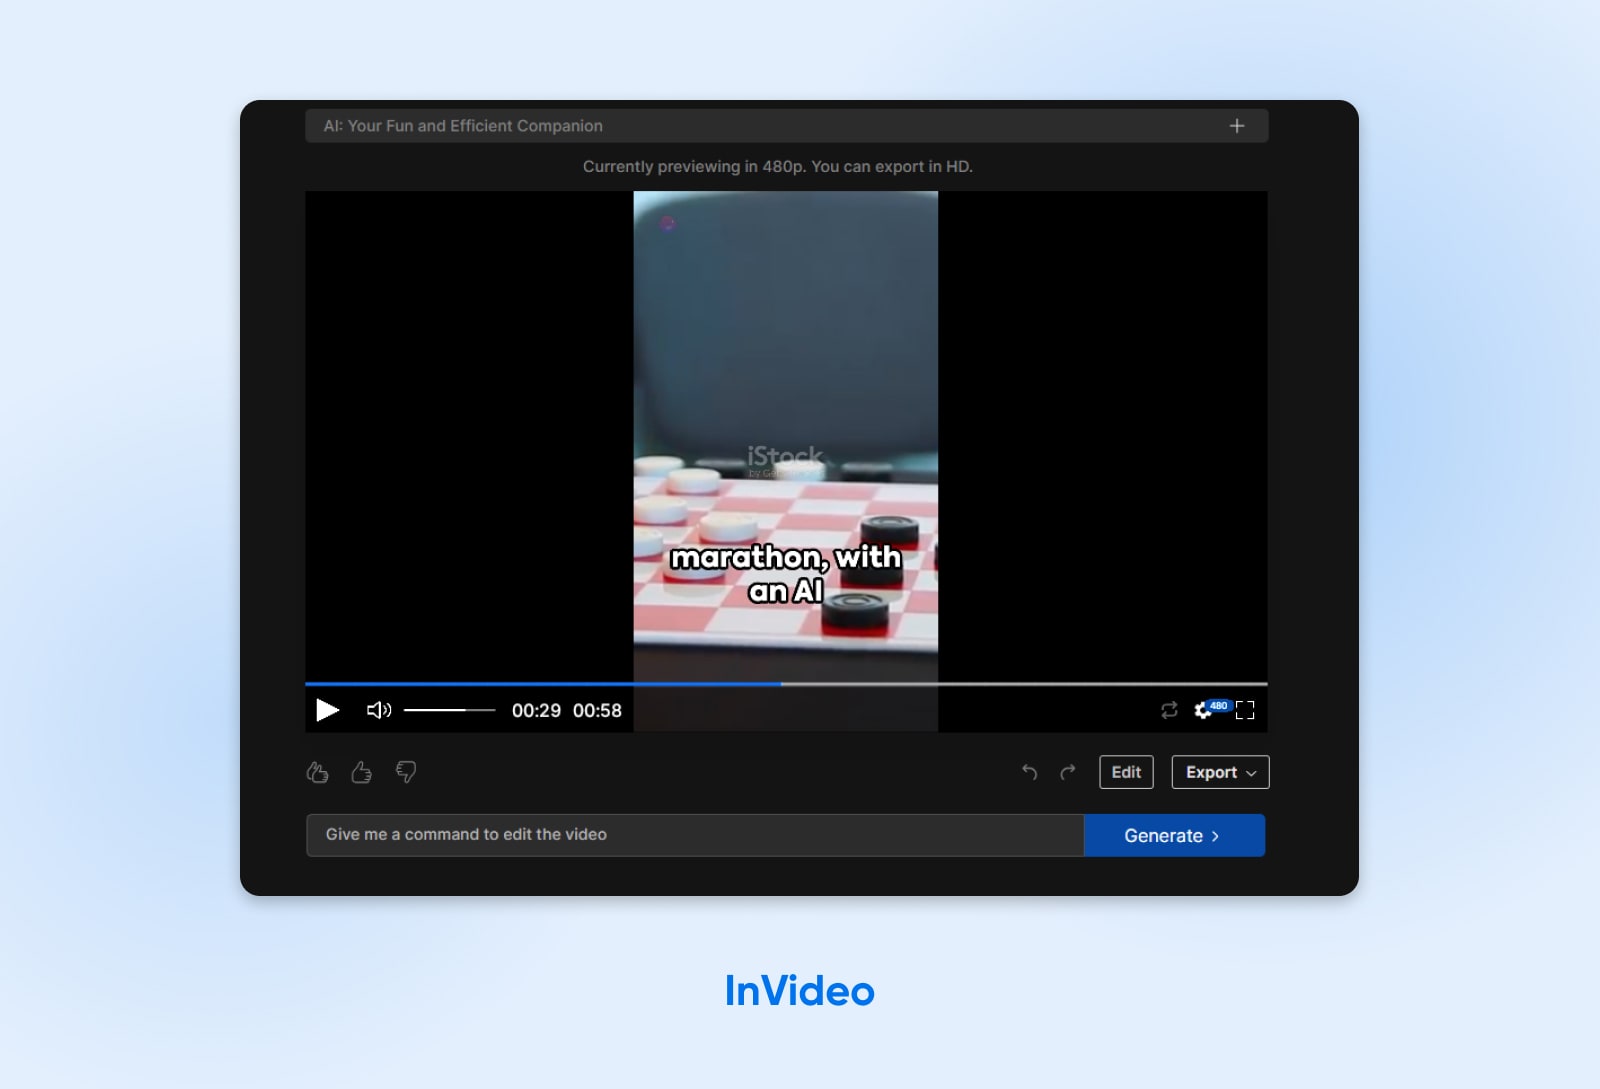 screenshot of InVideo in use with a video istock clicp and captions reading "marathon, with an AI" 